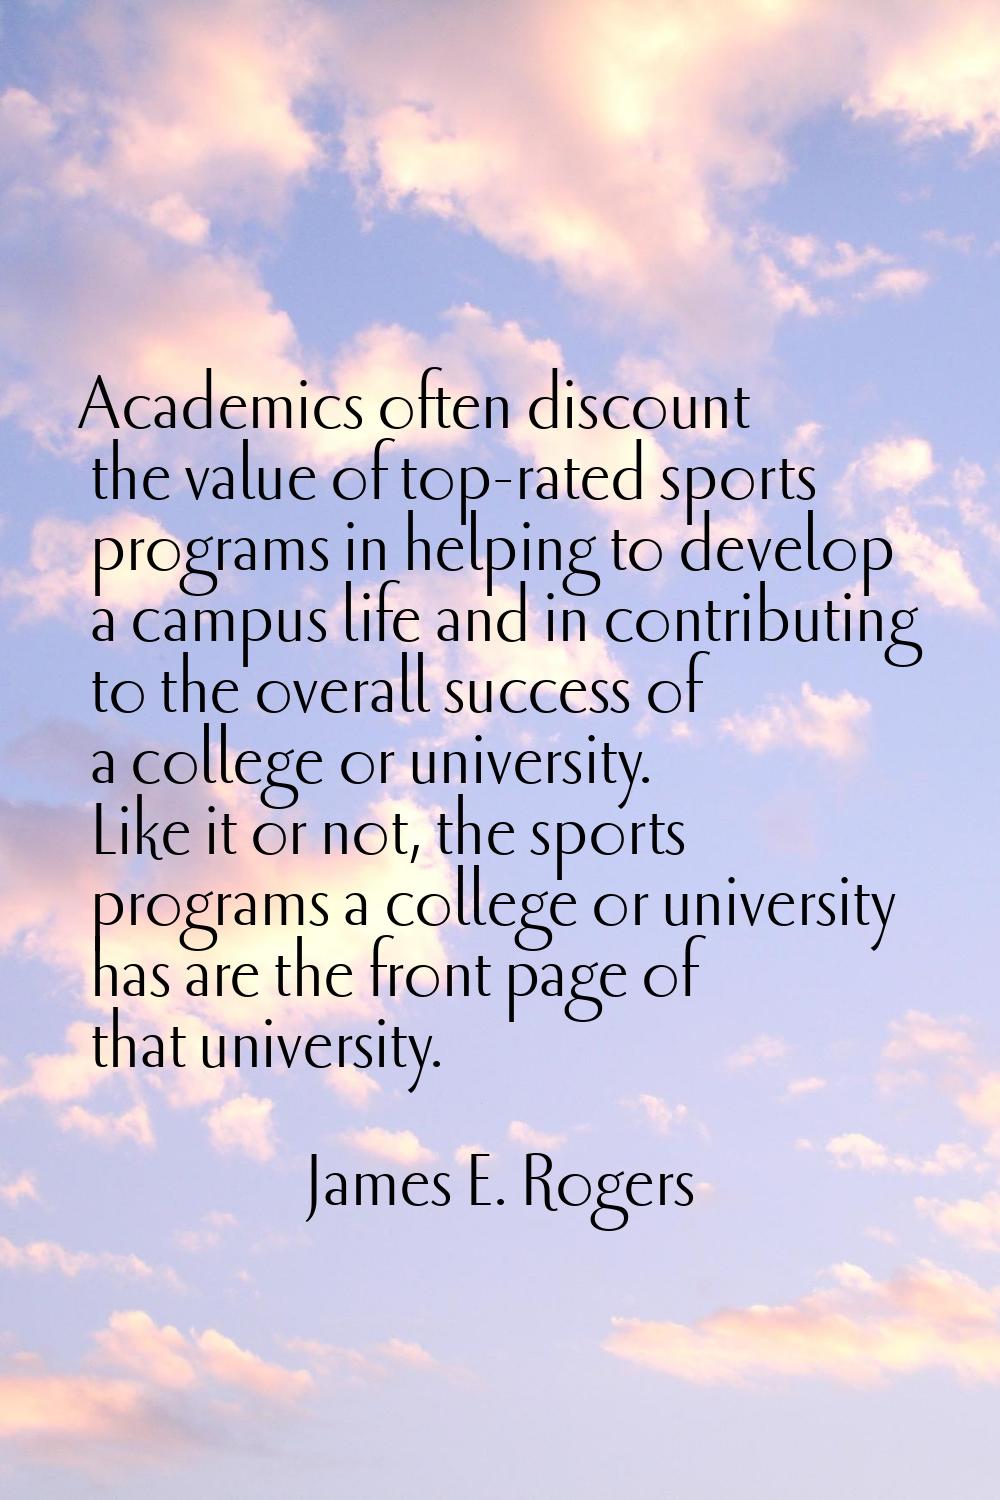 Academics often discount the value of top-rated sports programs in helping to develop a campus life